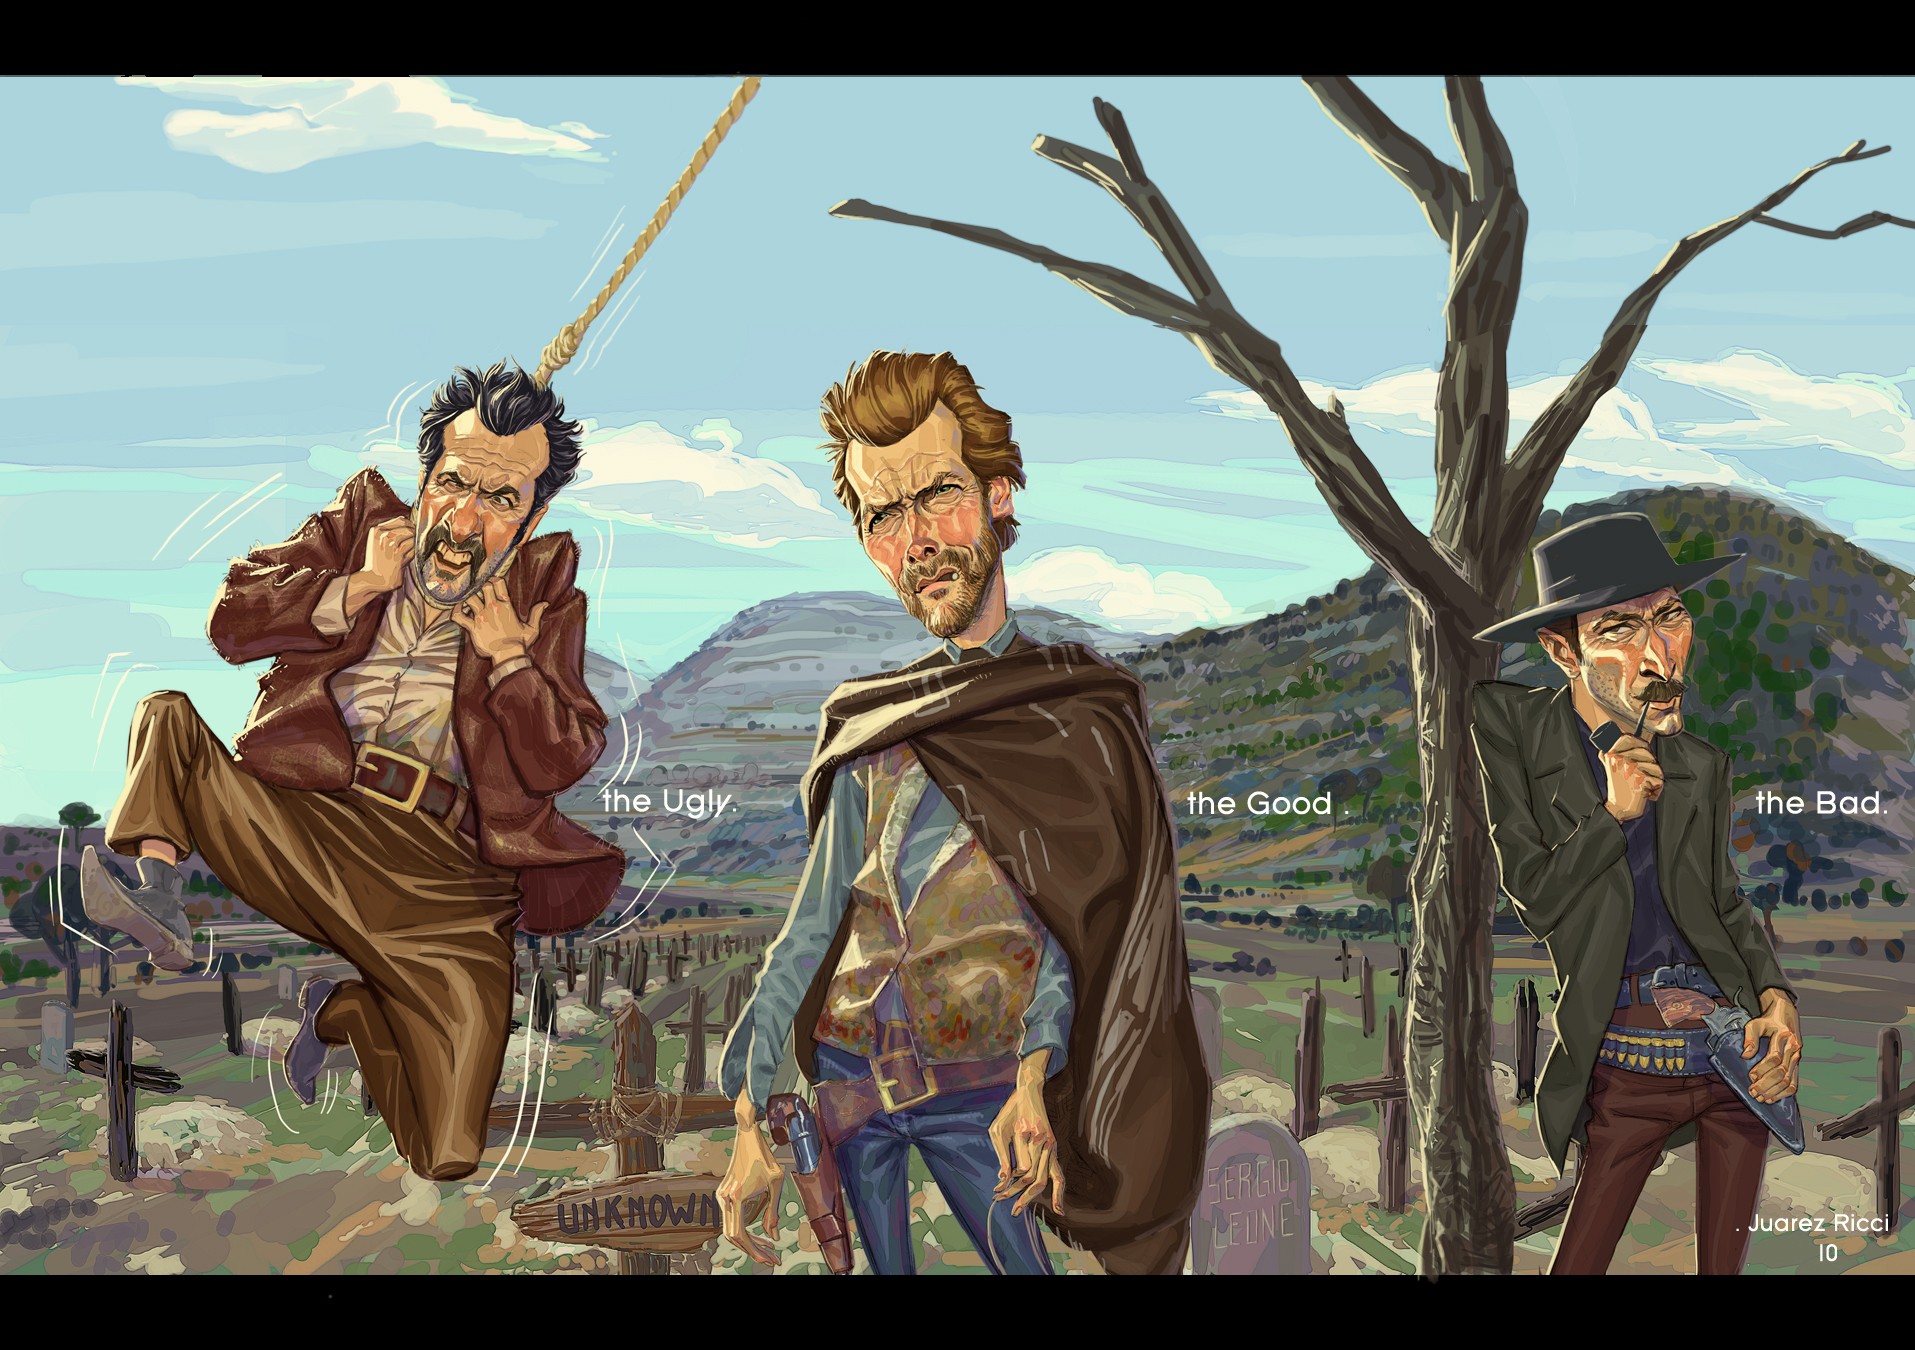 The Good The Bad And The Ugly Clint Eastwood Lee Van Cleef Eli Wallach Blondie 1915x1350